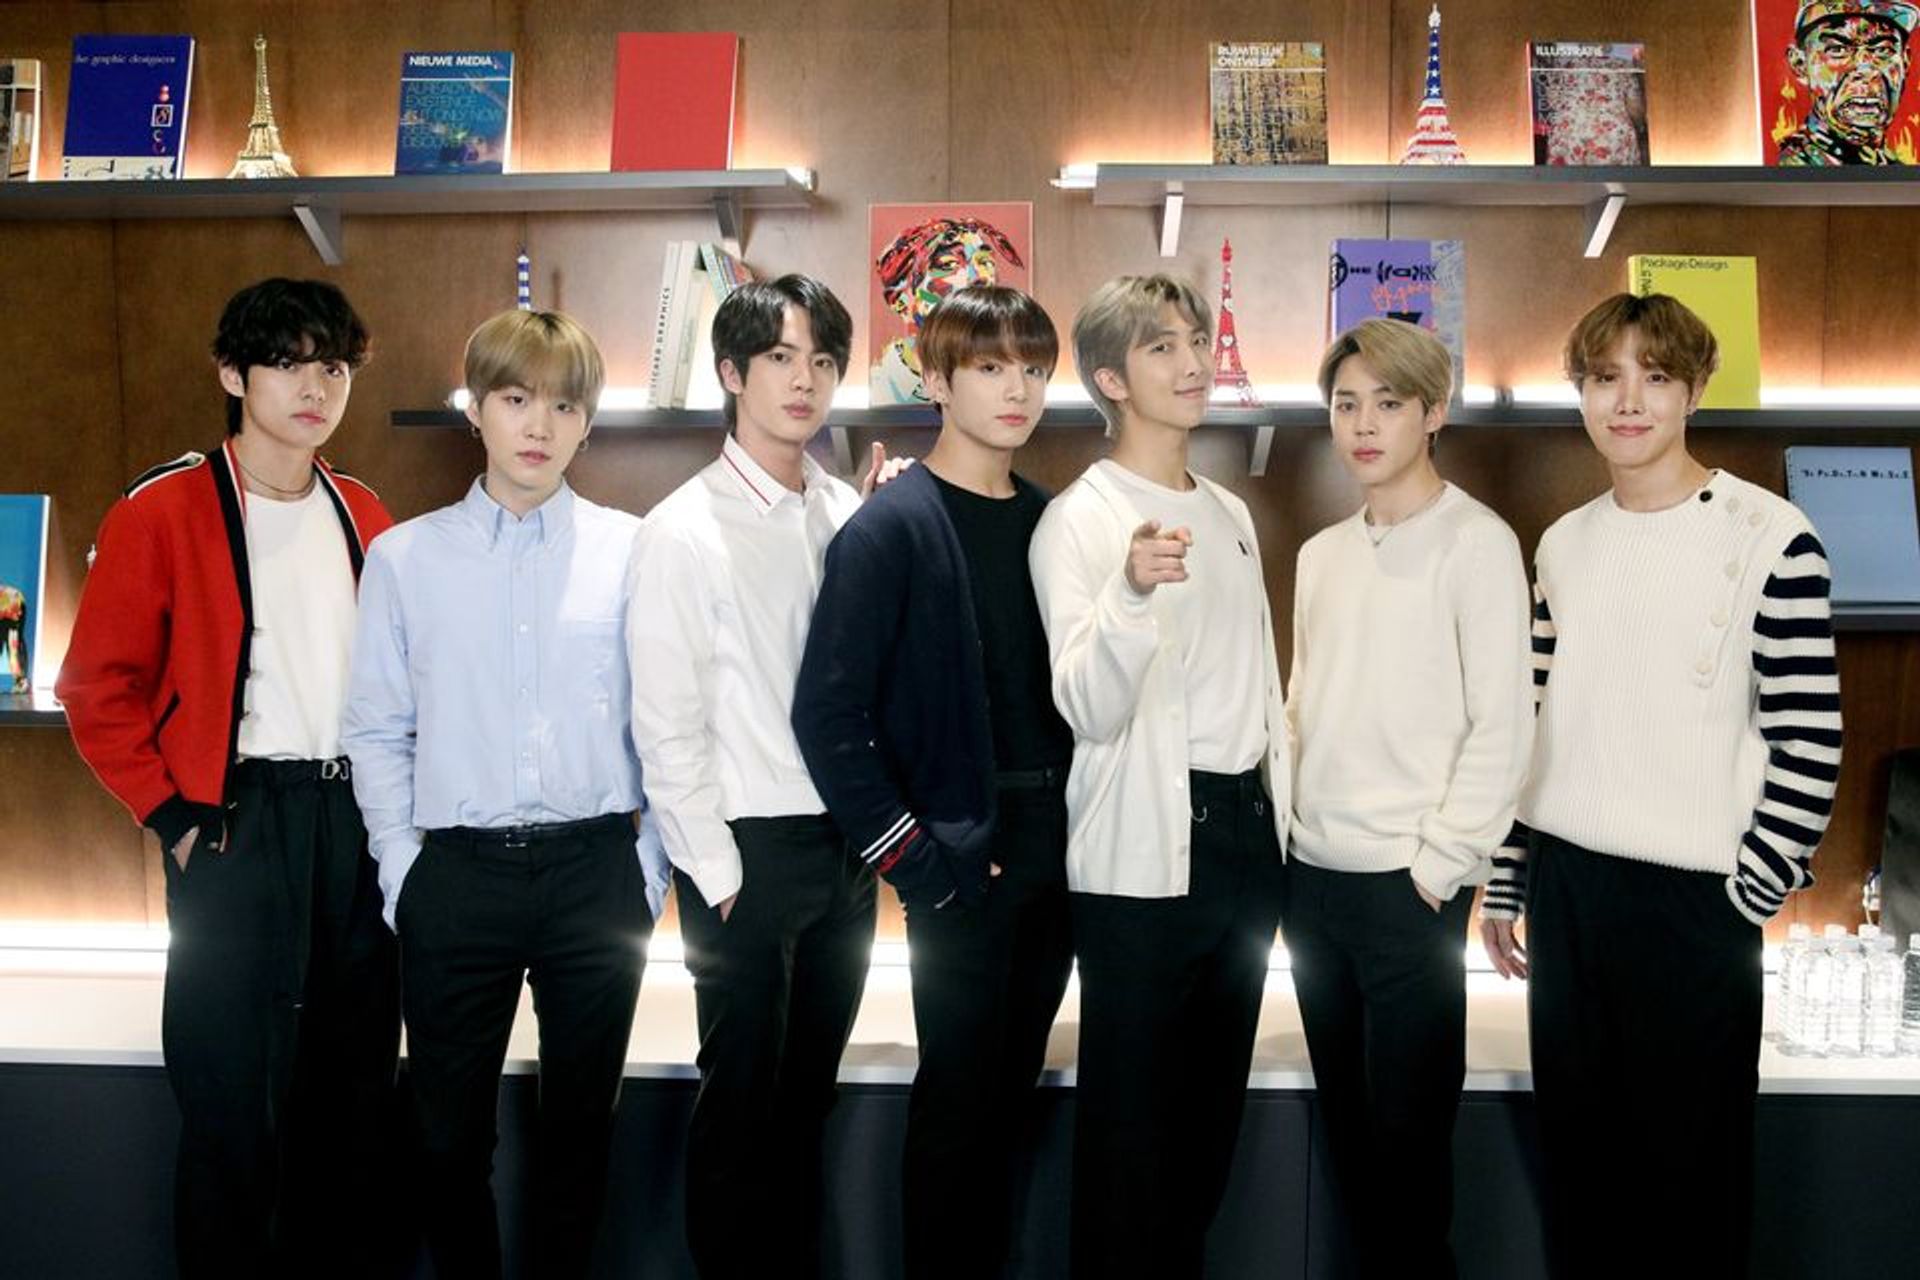 South Korea’s best-selling boyband, BTS, collaborated with the Serpentine Galleries for a series of major public art projects across the globe. The collaboration brought new audiences to the London institution, says Ben Vickers Photo: Taeseong Kim